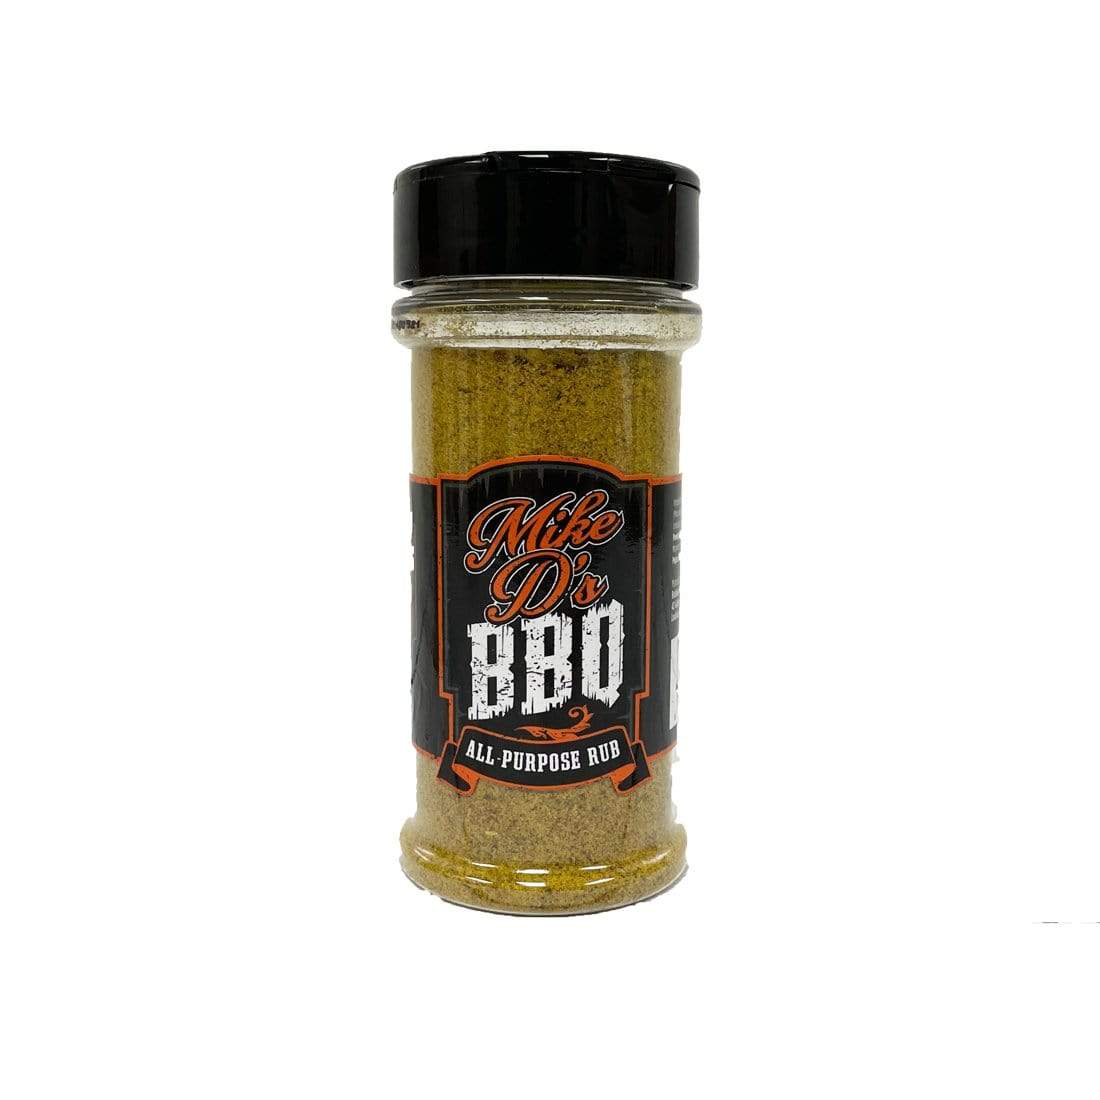 Mike D's BBQ Mike D's All Purpose Rub